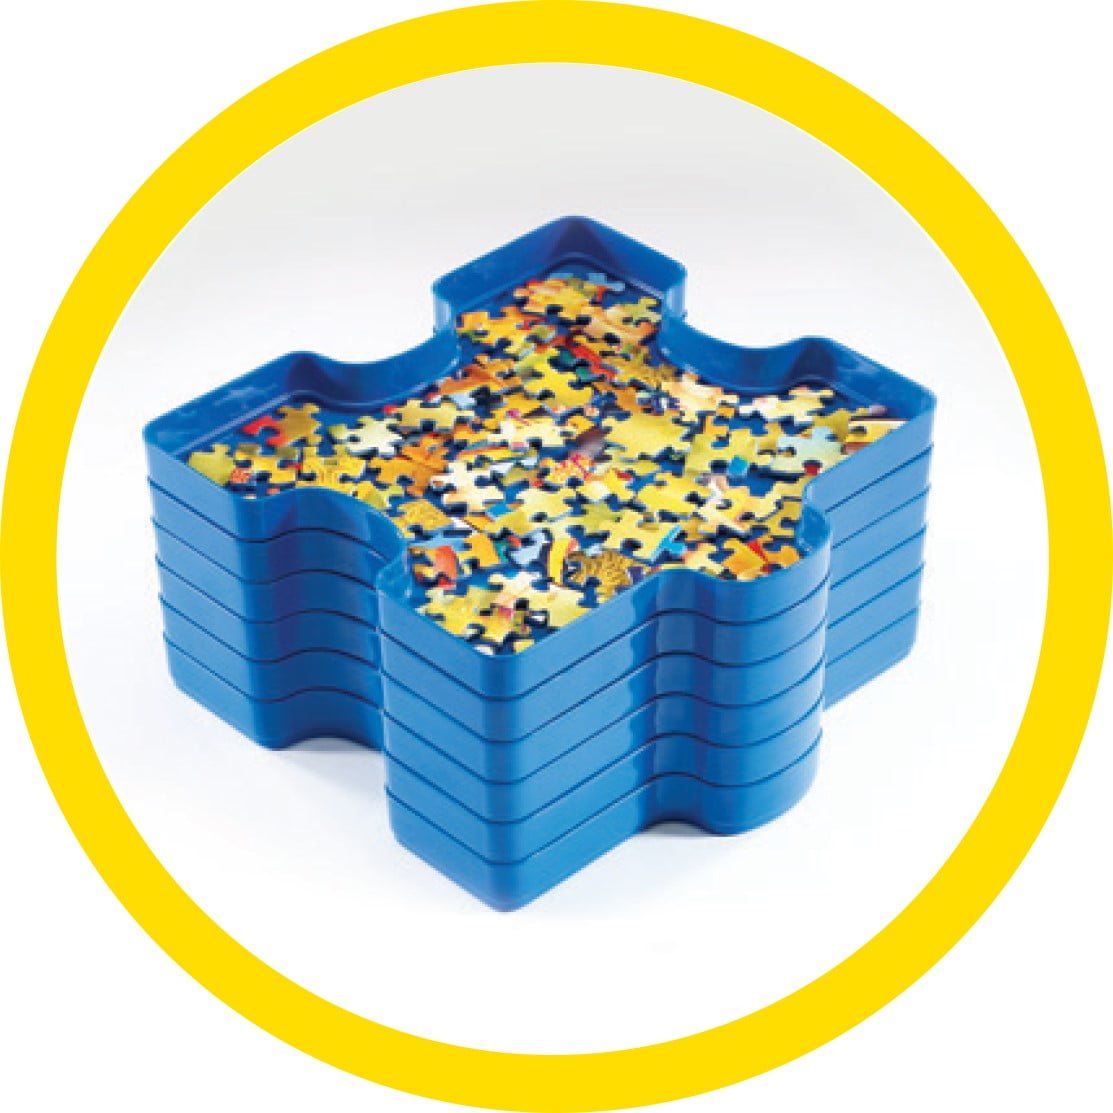 New Clementoni Puzzle Sorter Accesories For Up To 1000 Pieces 